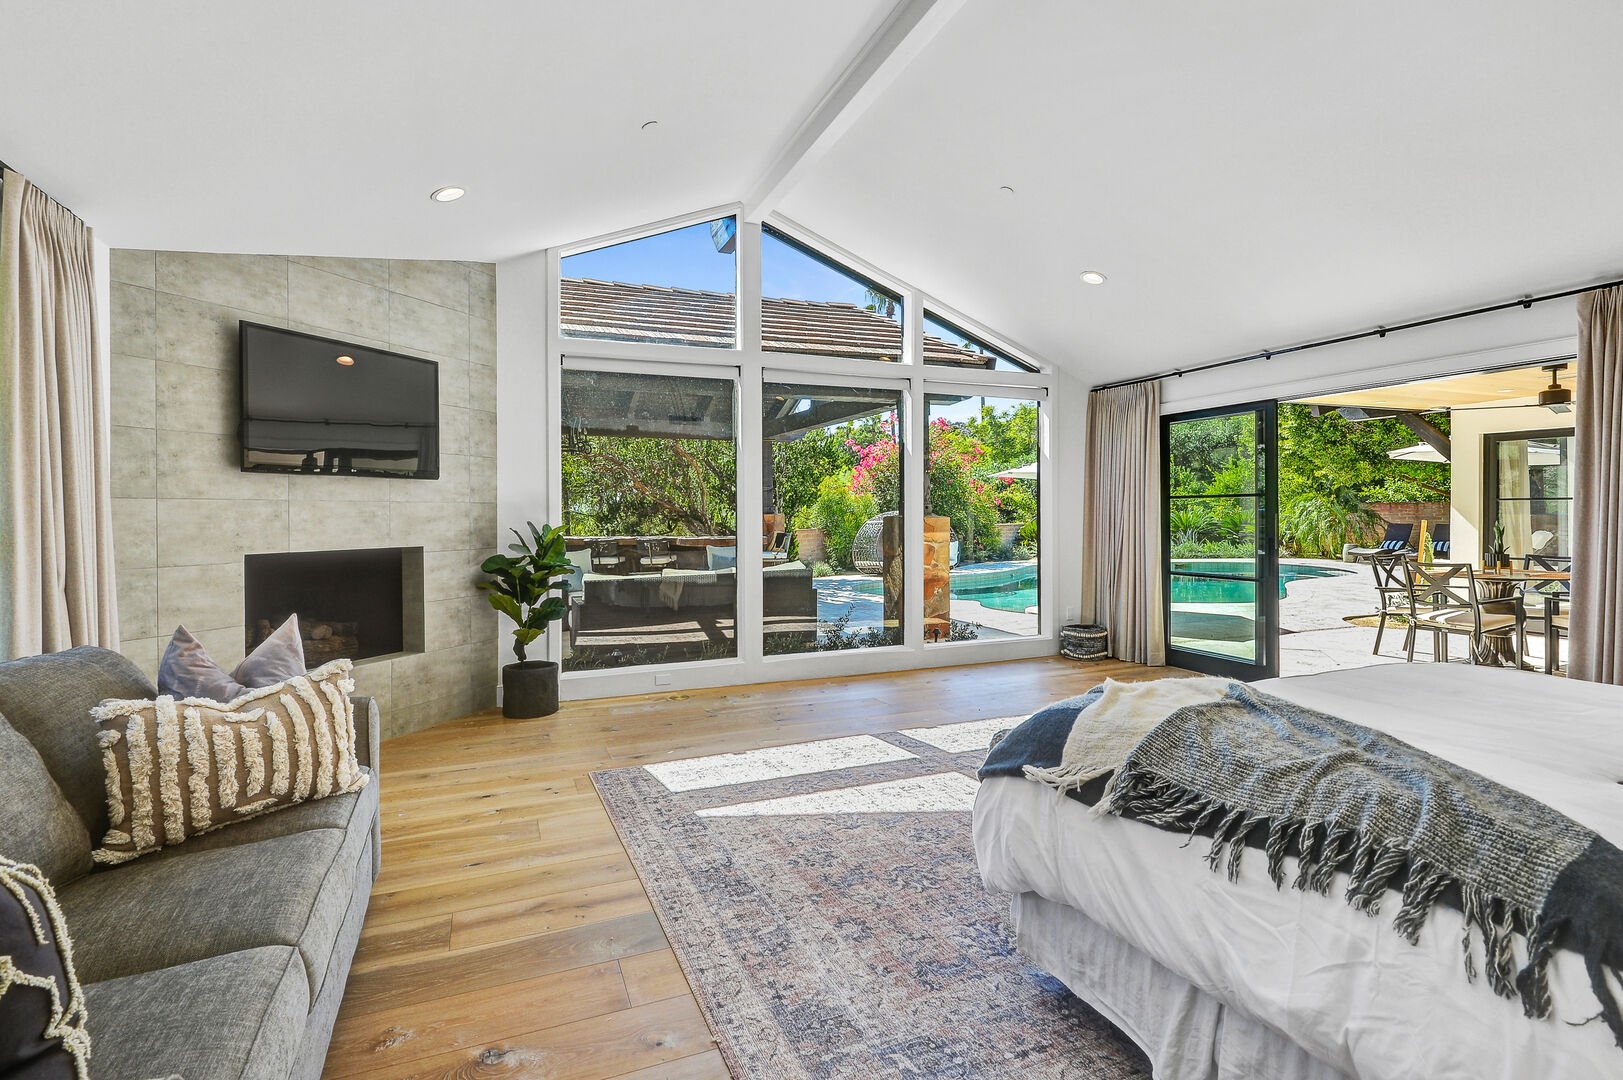 The master bedroom offers a view through picturesque windows towards the pool and gazebo.